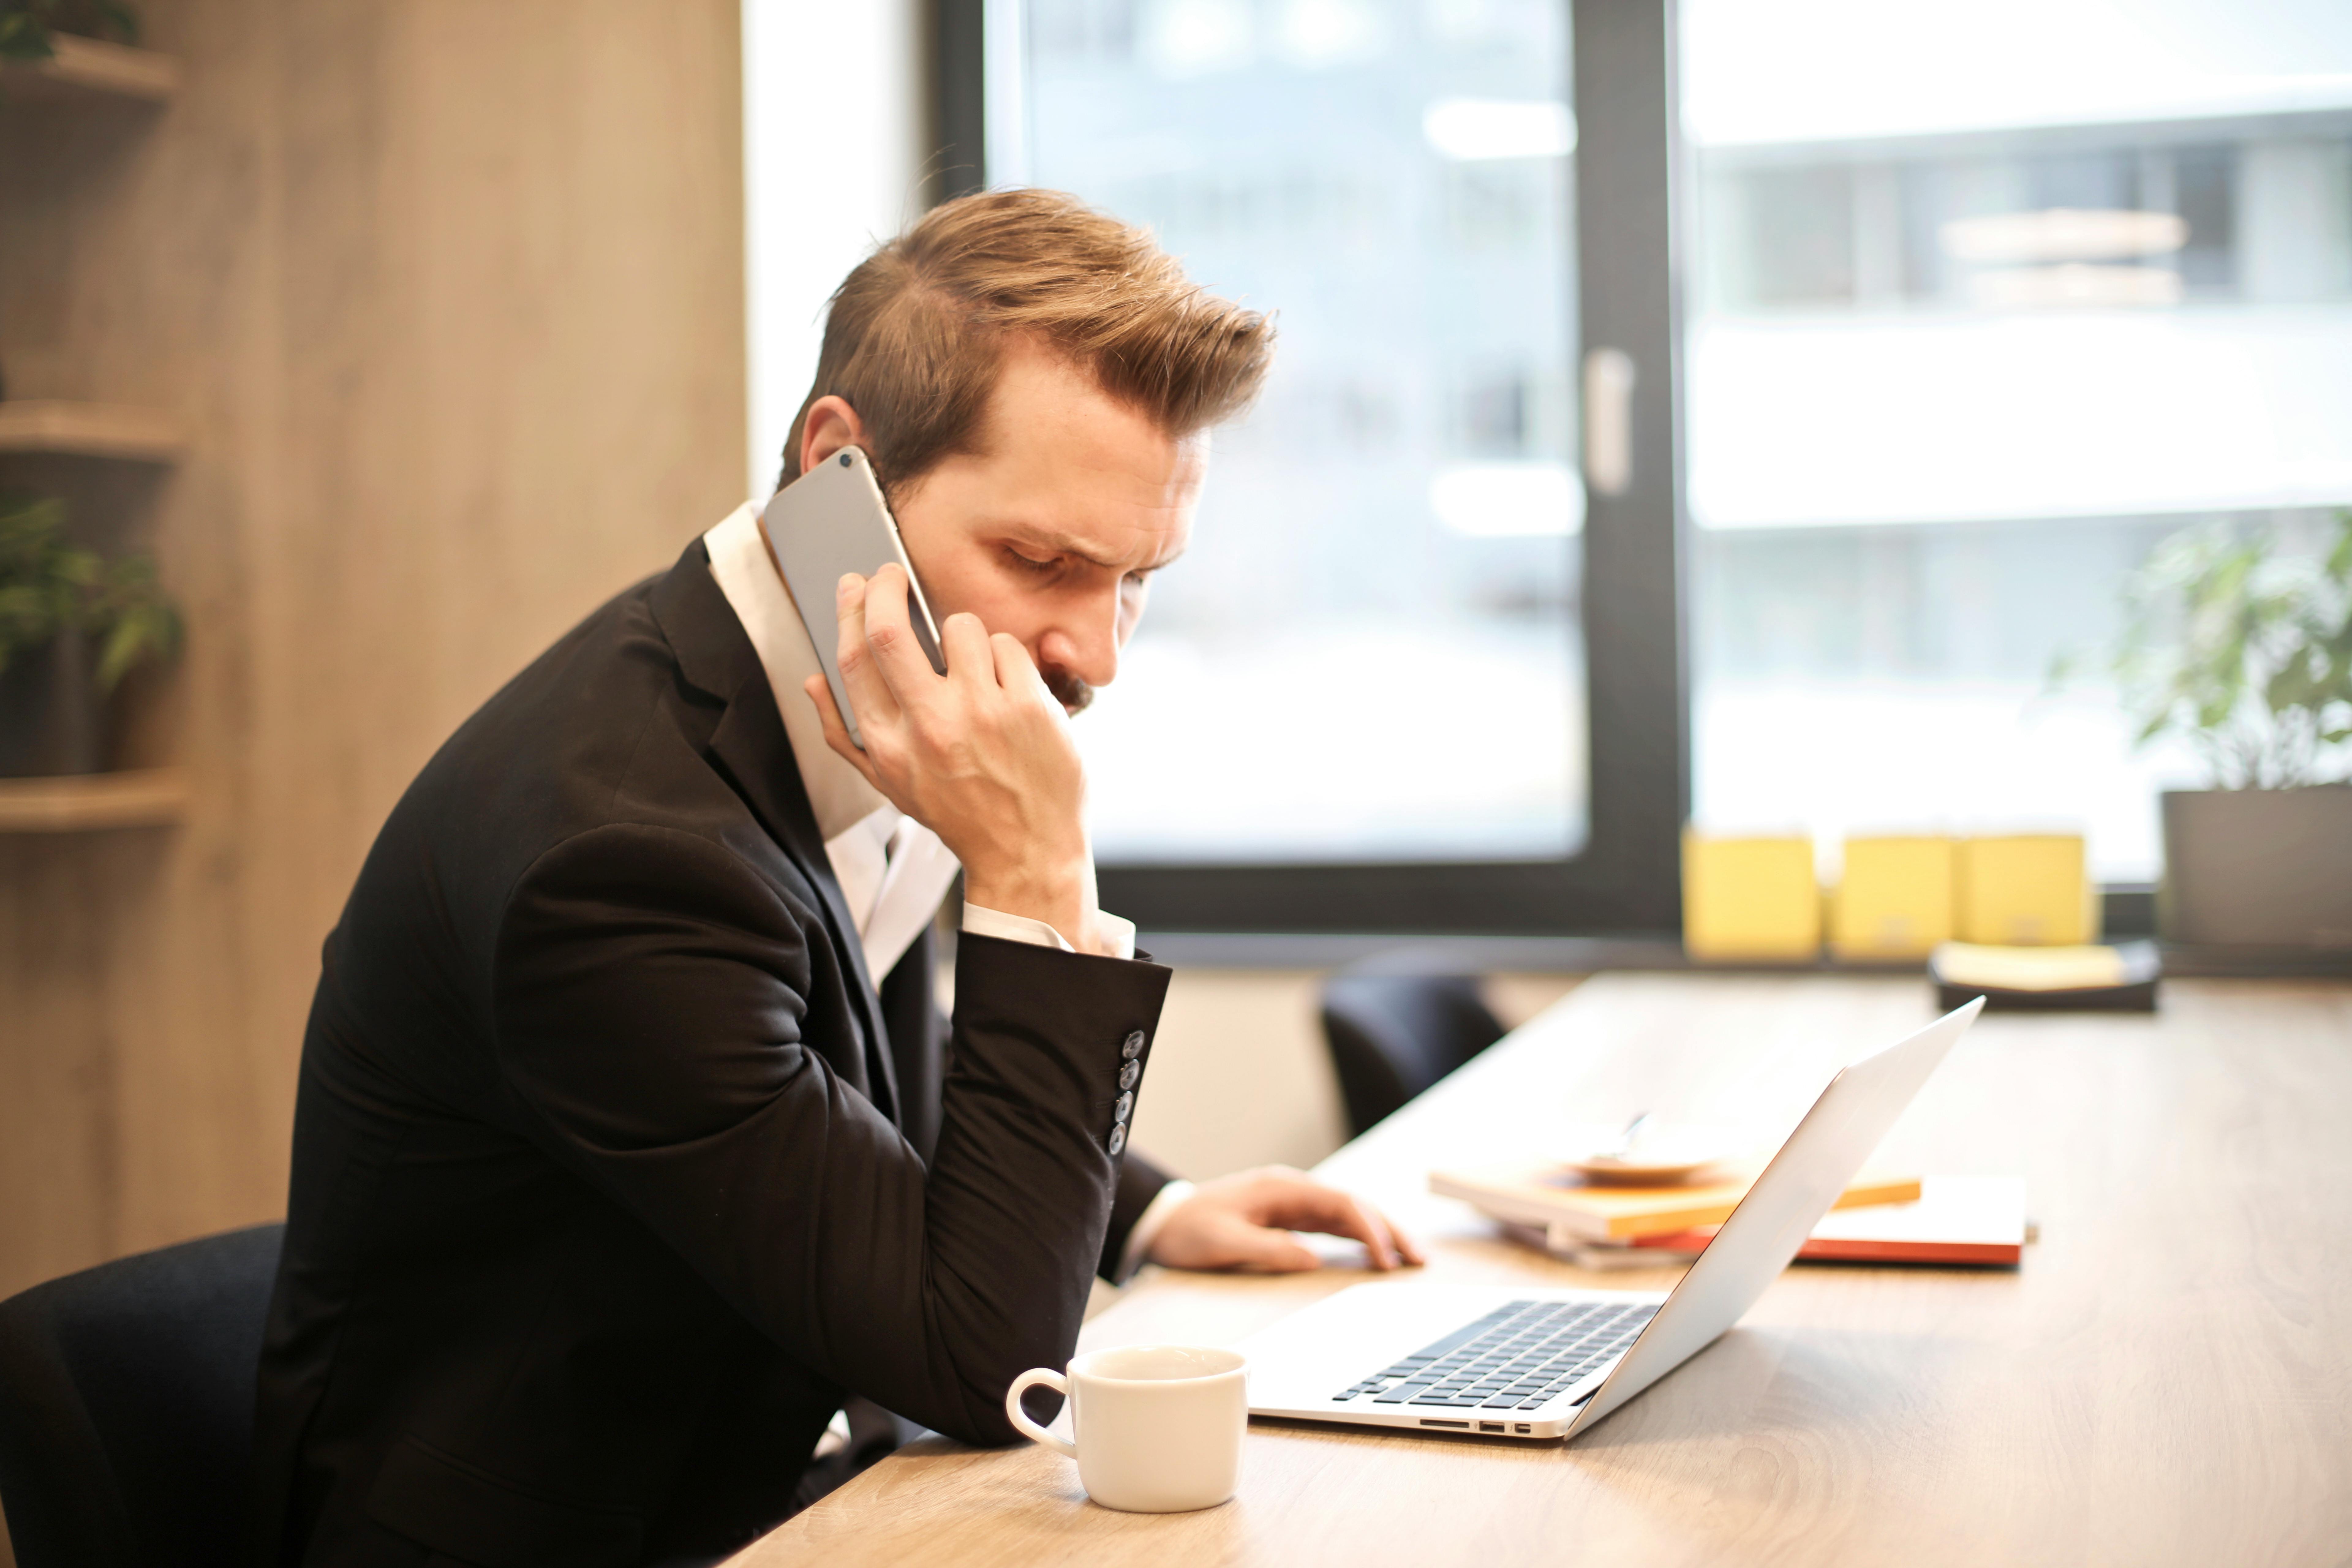 A concerned businessman on the phone | Source: Andrea Piacquadio on Pexels